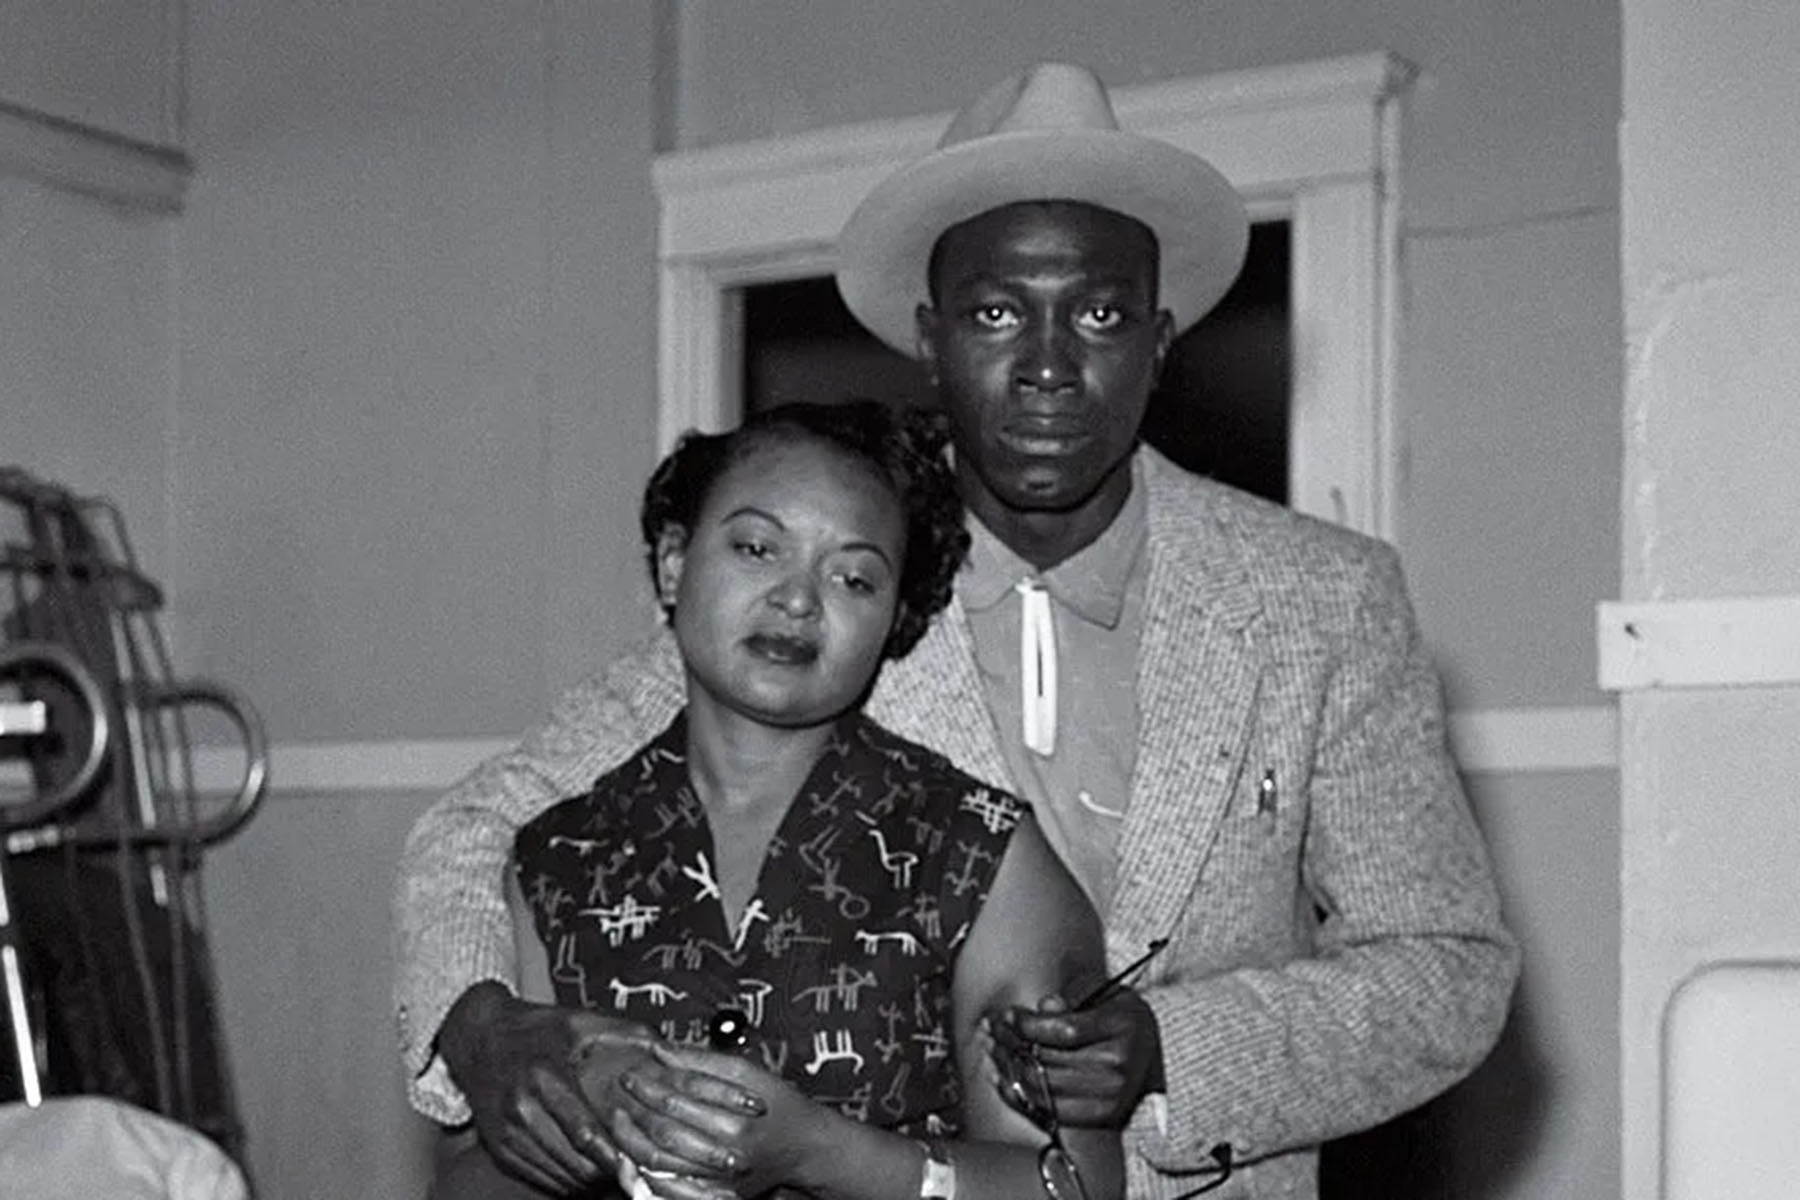 Mamie Till looks at the brutalized body of her son, Emmett Till. She is comforted by Gene Mobley, whom she would later marry.